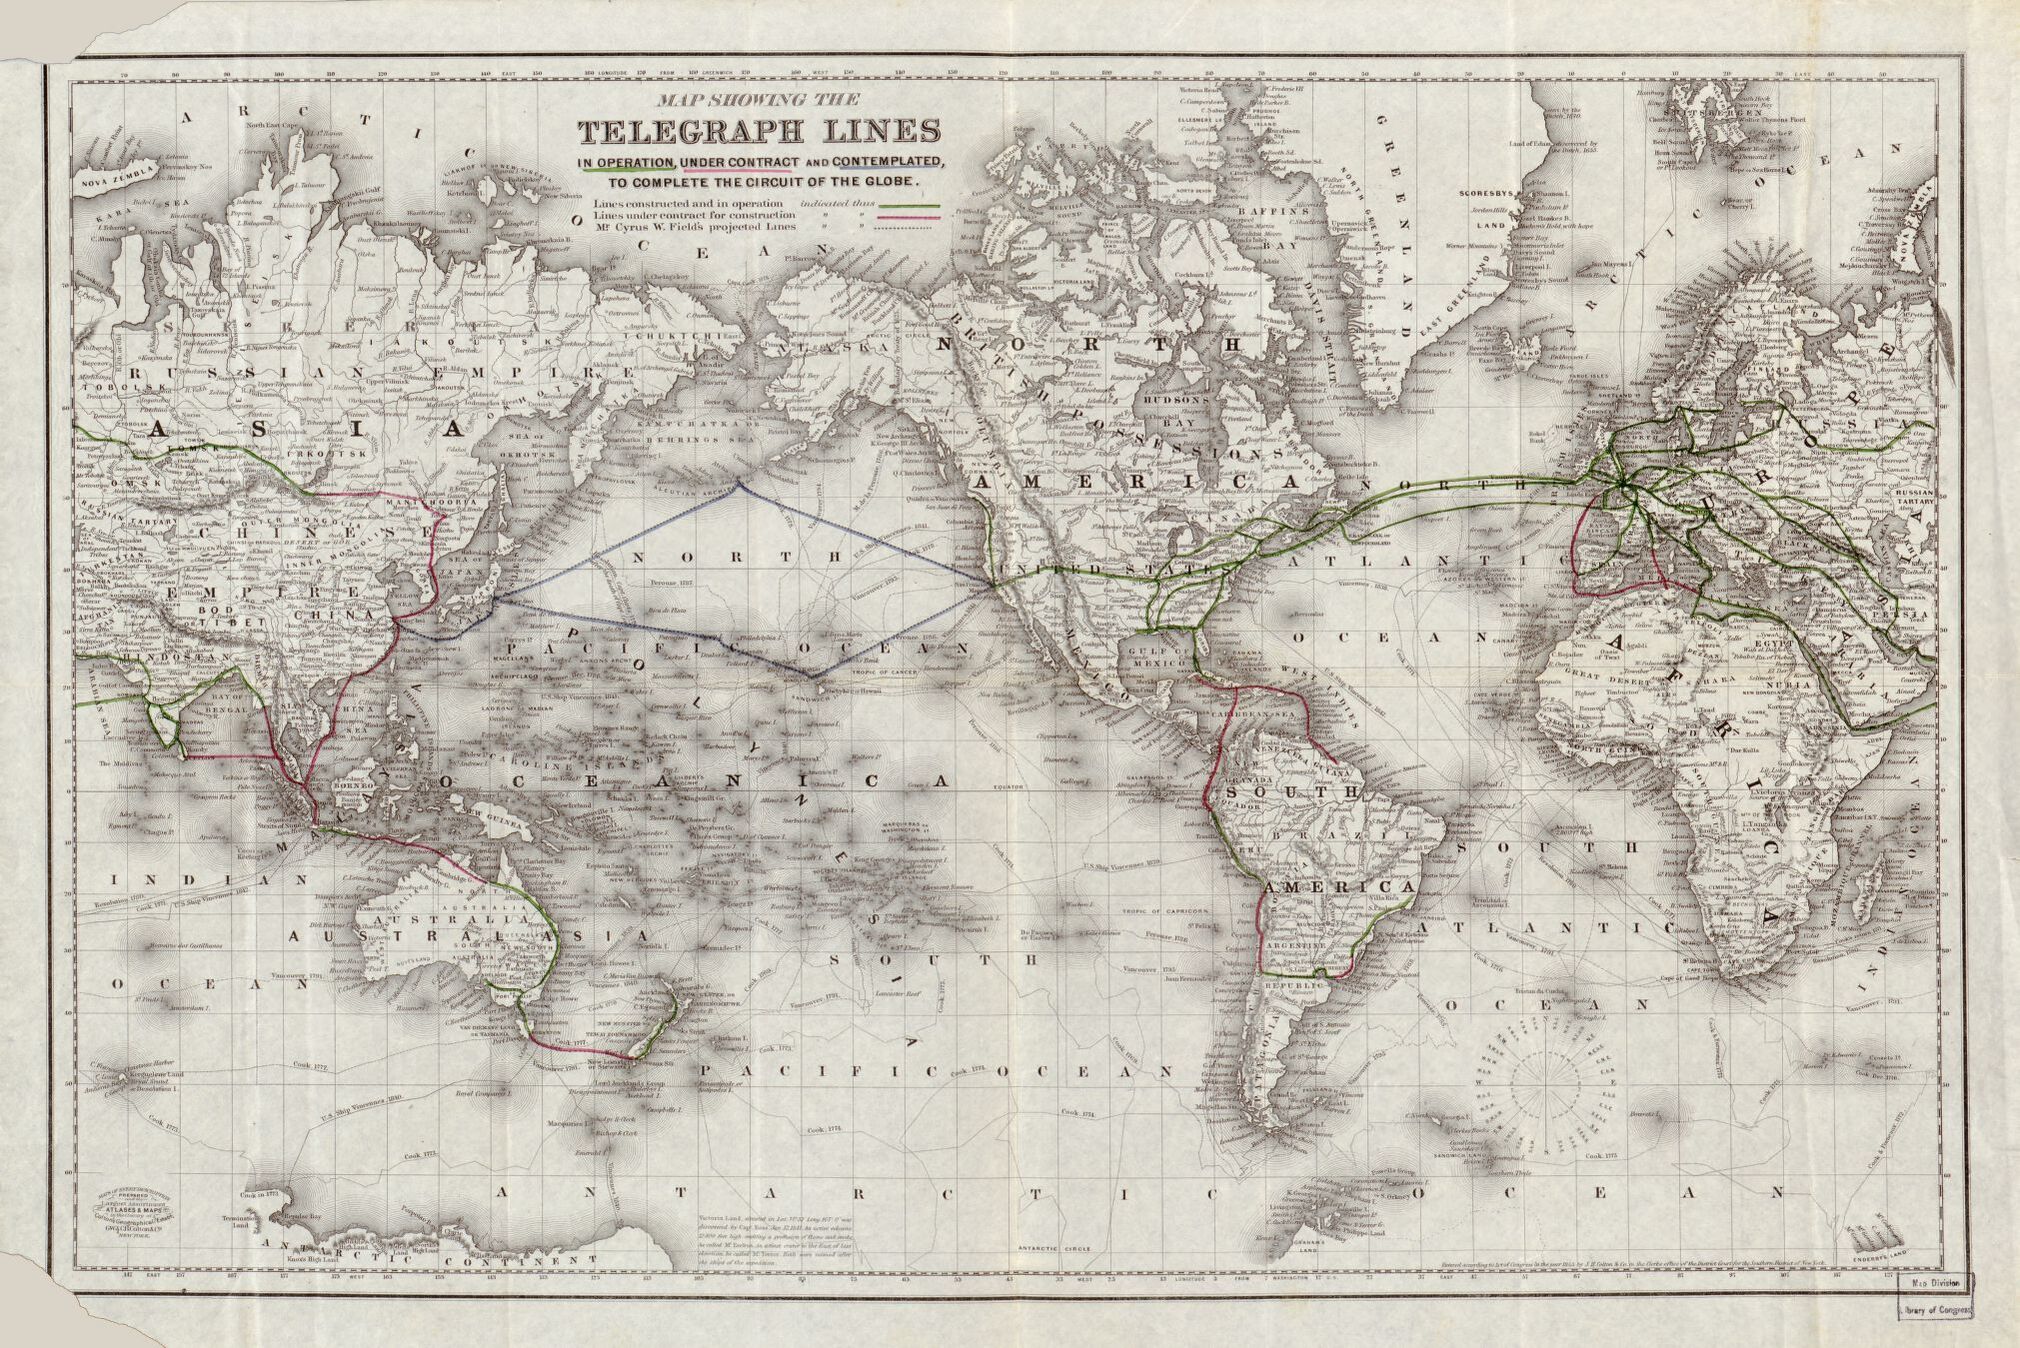 Map showing the telegraph lines in operation, under contract, and contemplated, to complete the circuit of the globe.